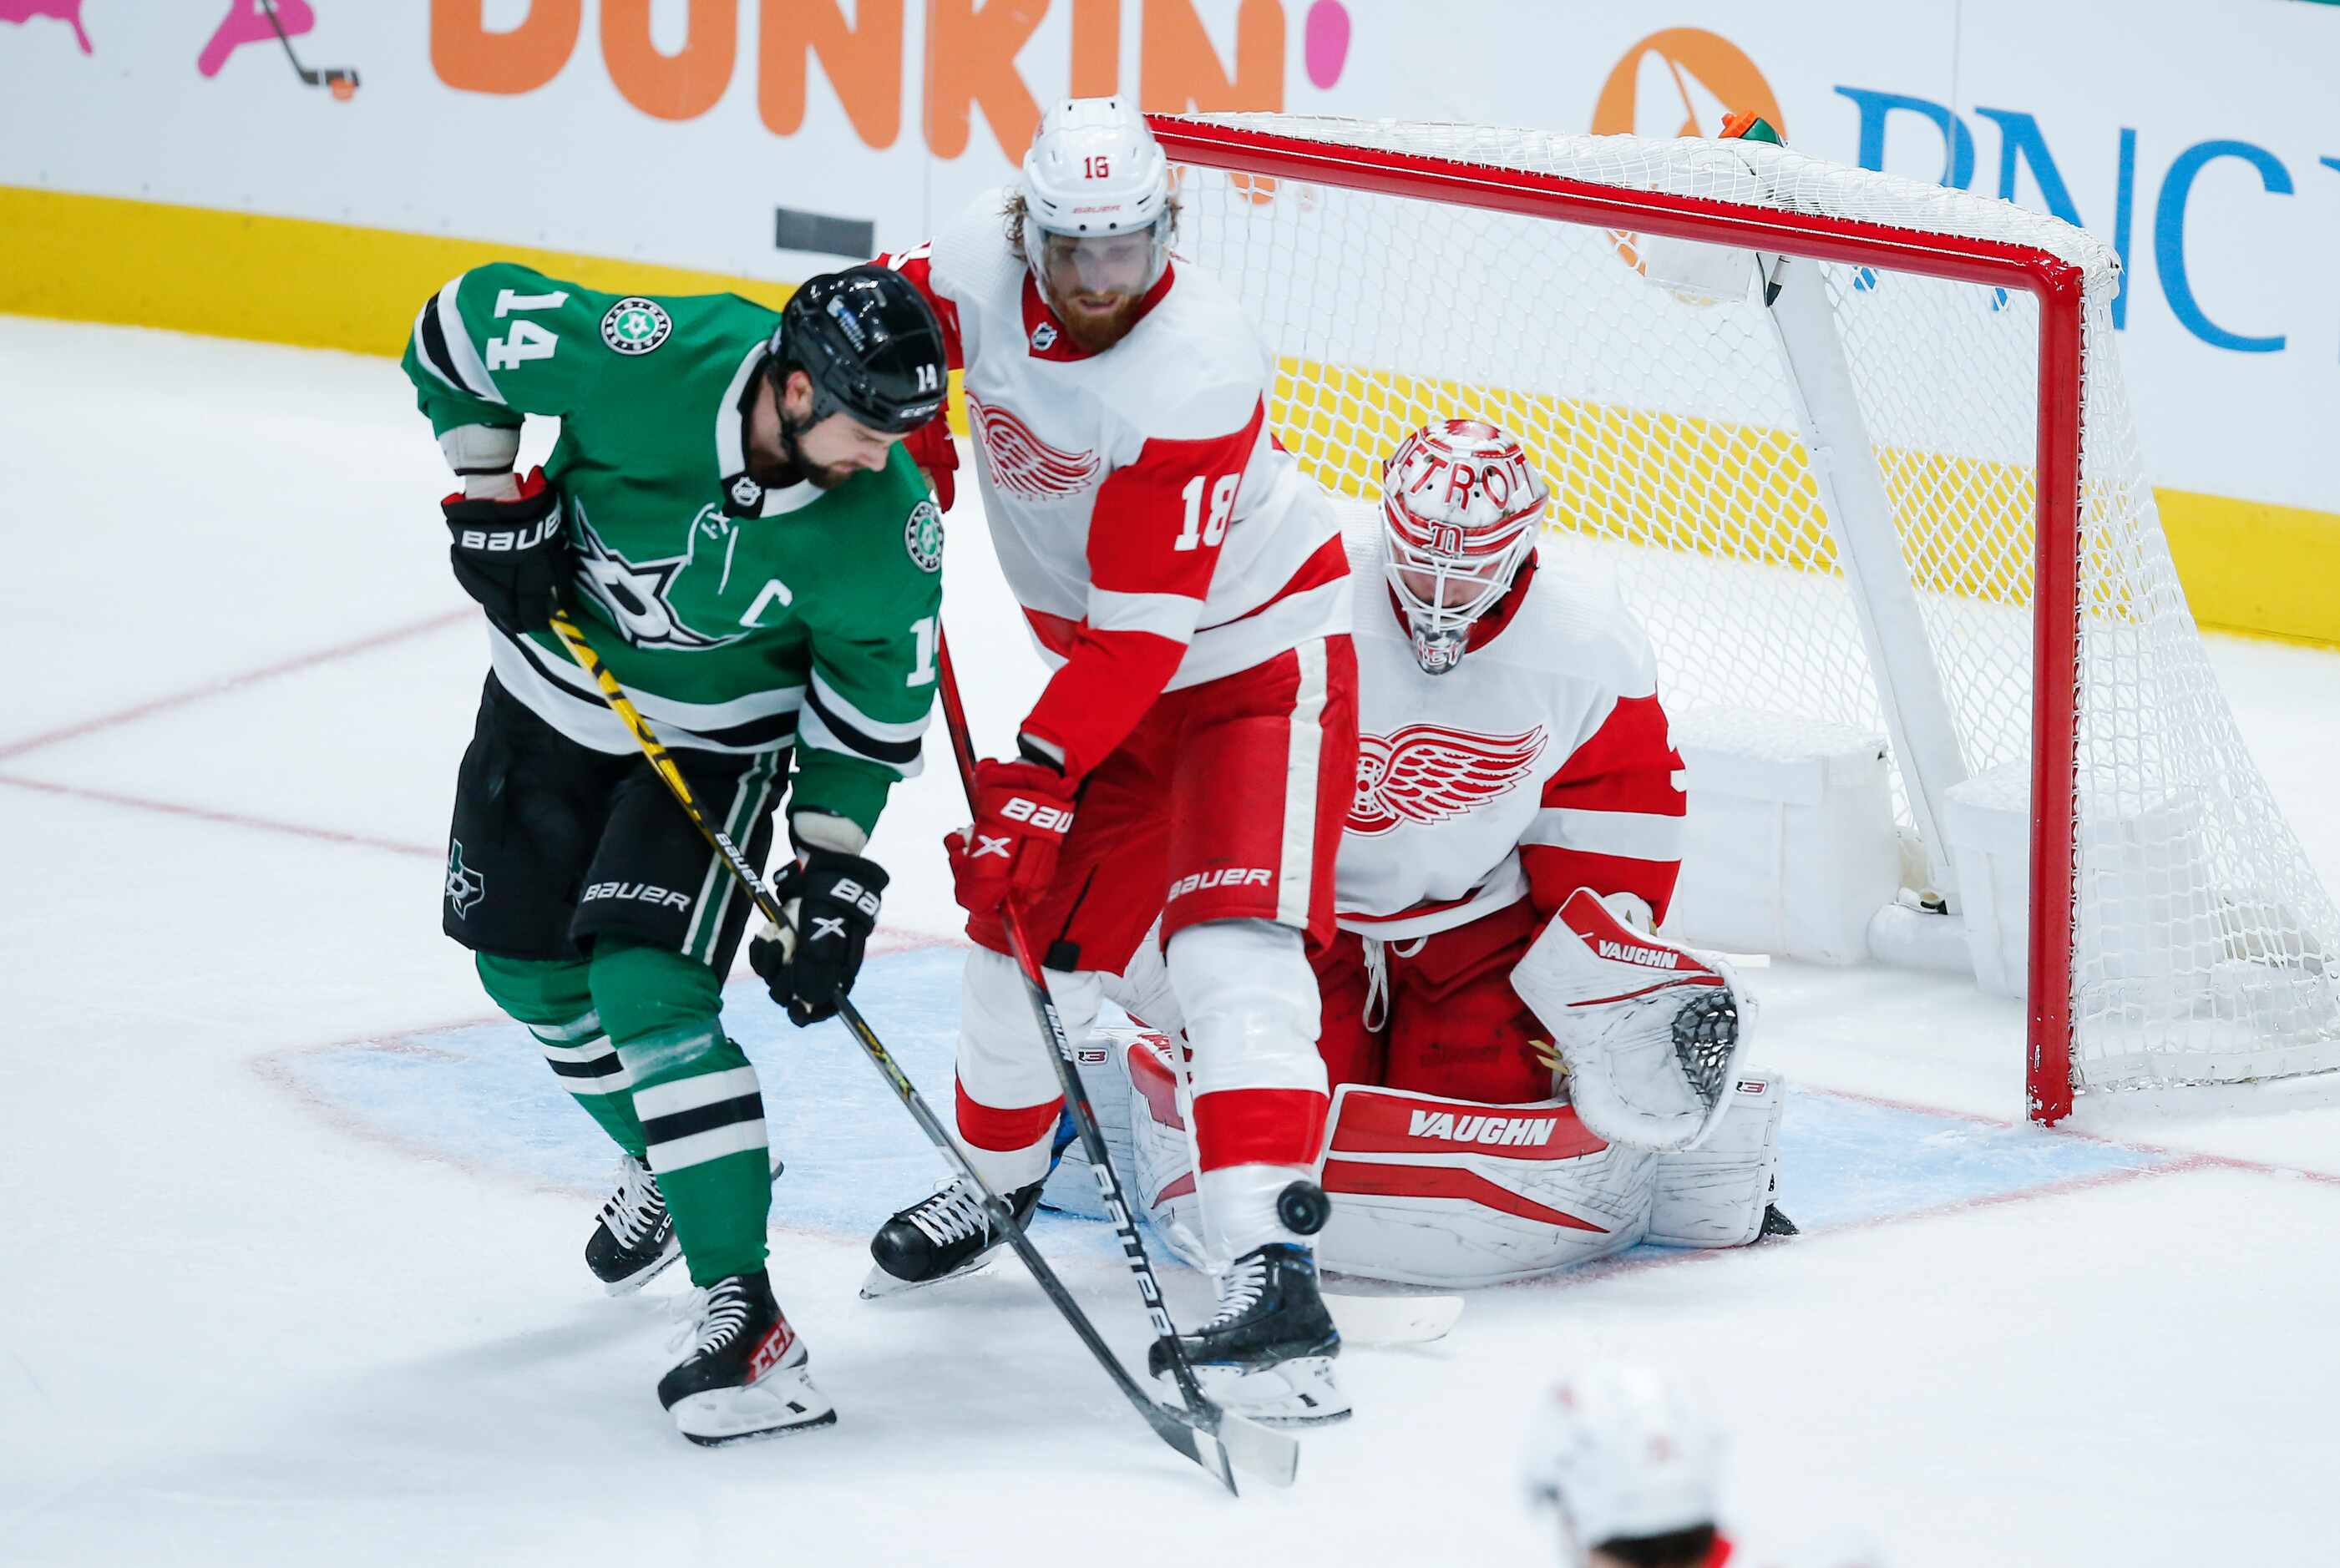 Dallas Stars forward Jamie Benn (14) attempts to deflect a shot as Detroit Red Wings...